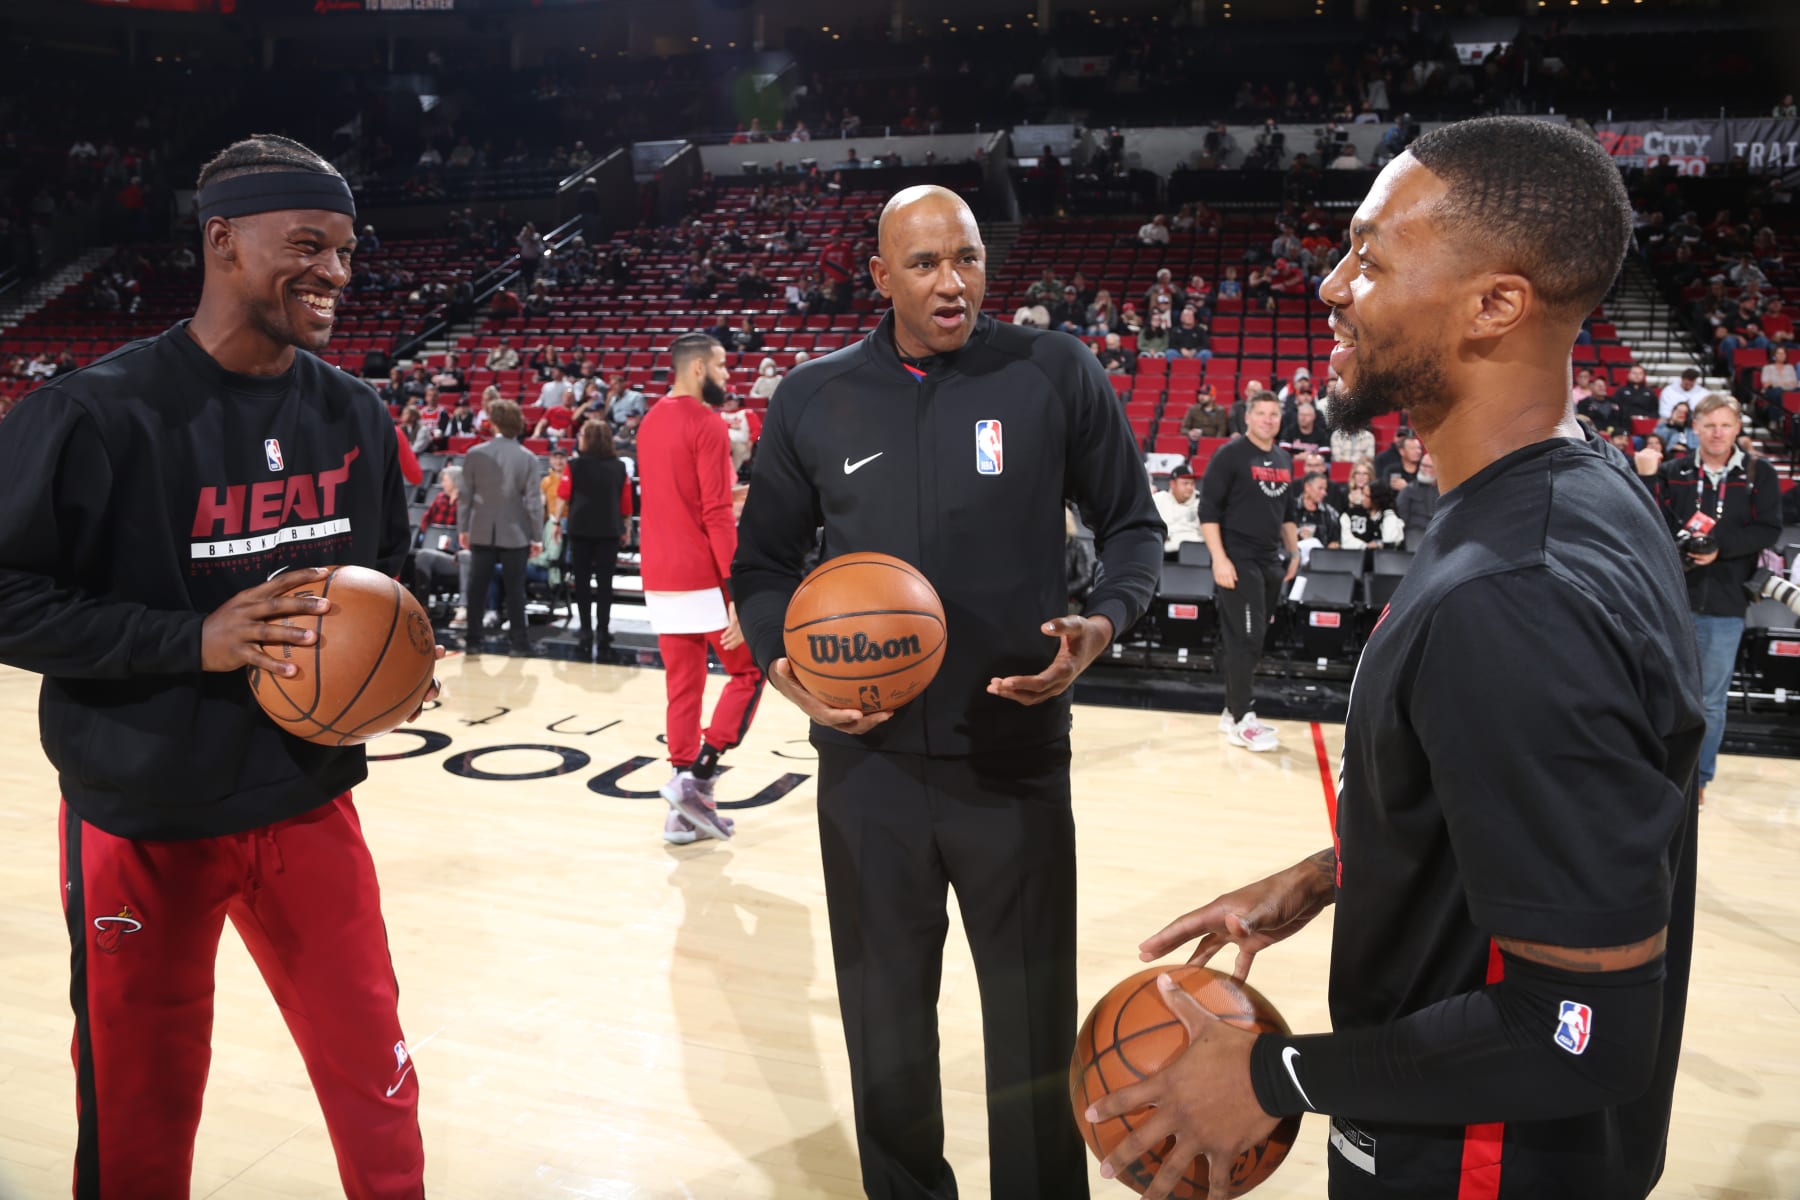 Miami Heat: Aiming to create a home away from home